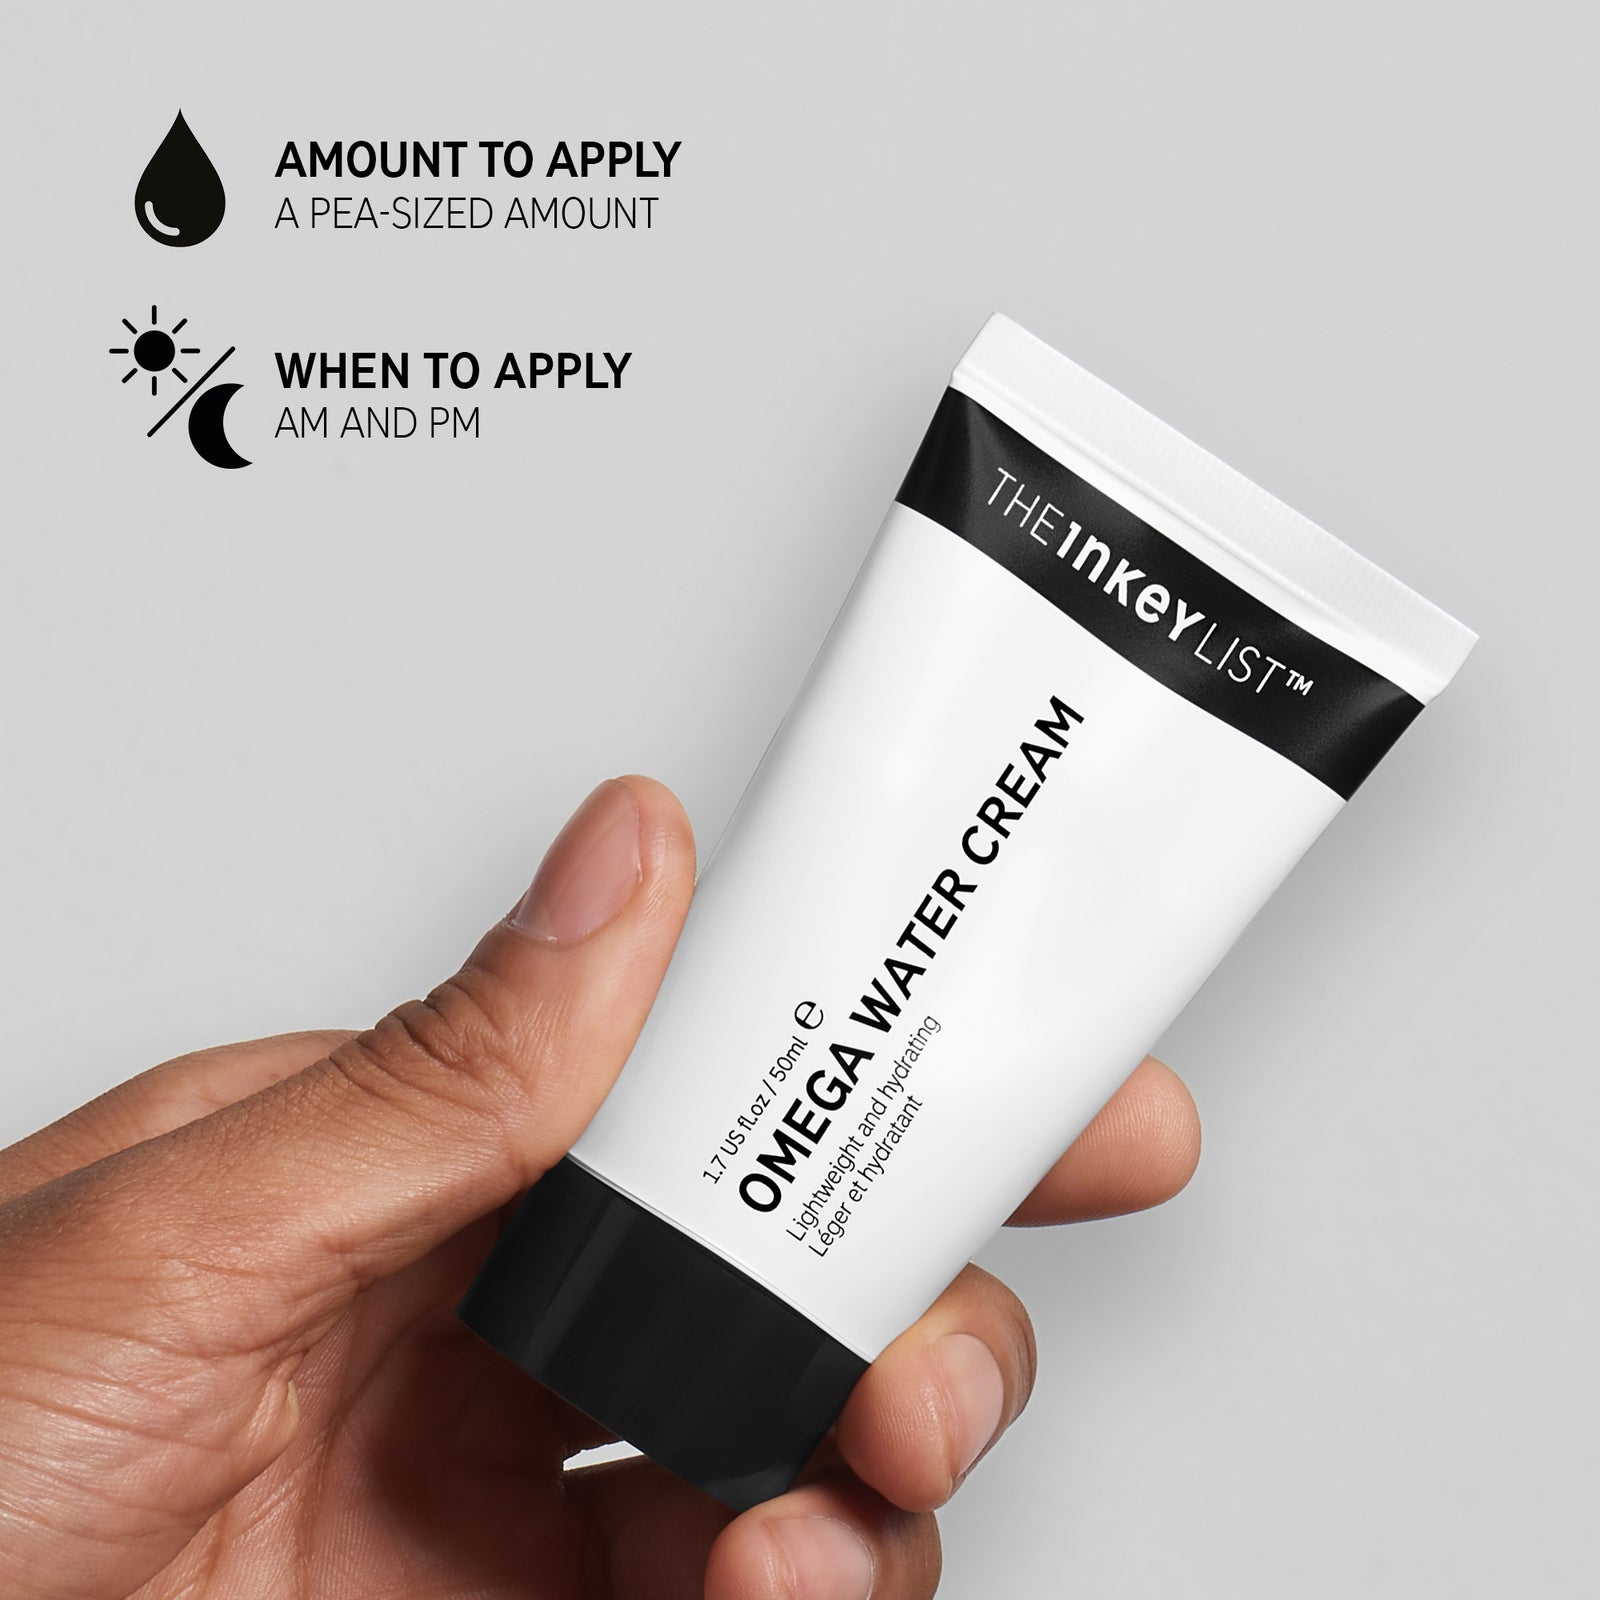 Hand holding Omega Water Cream with black text explaining how and when to use it.